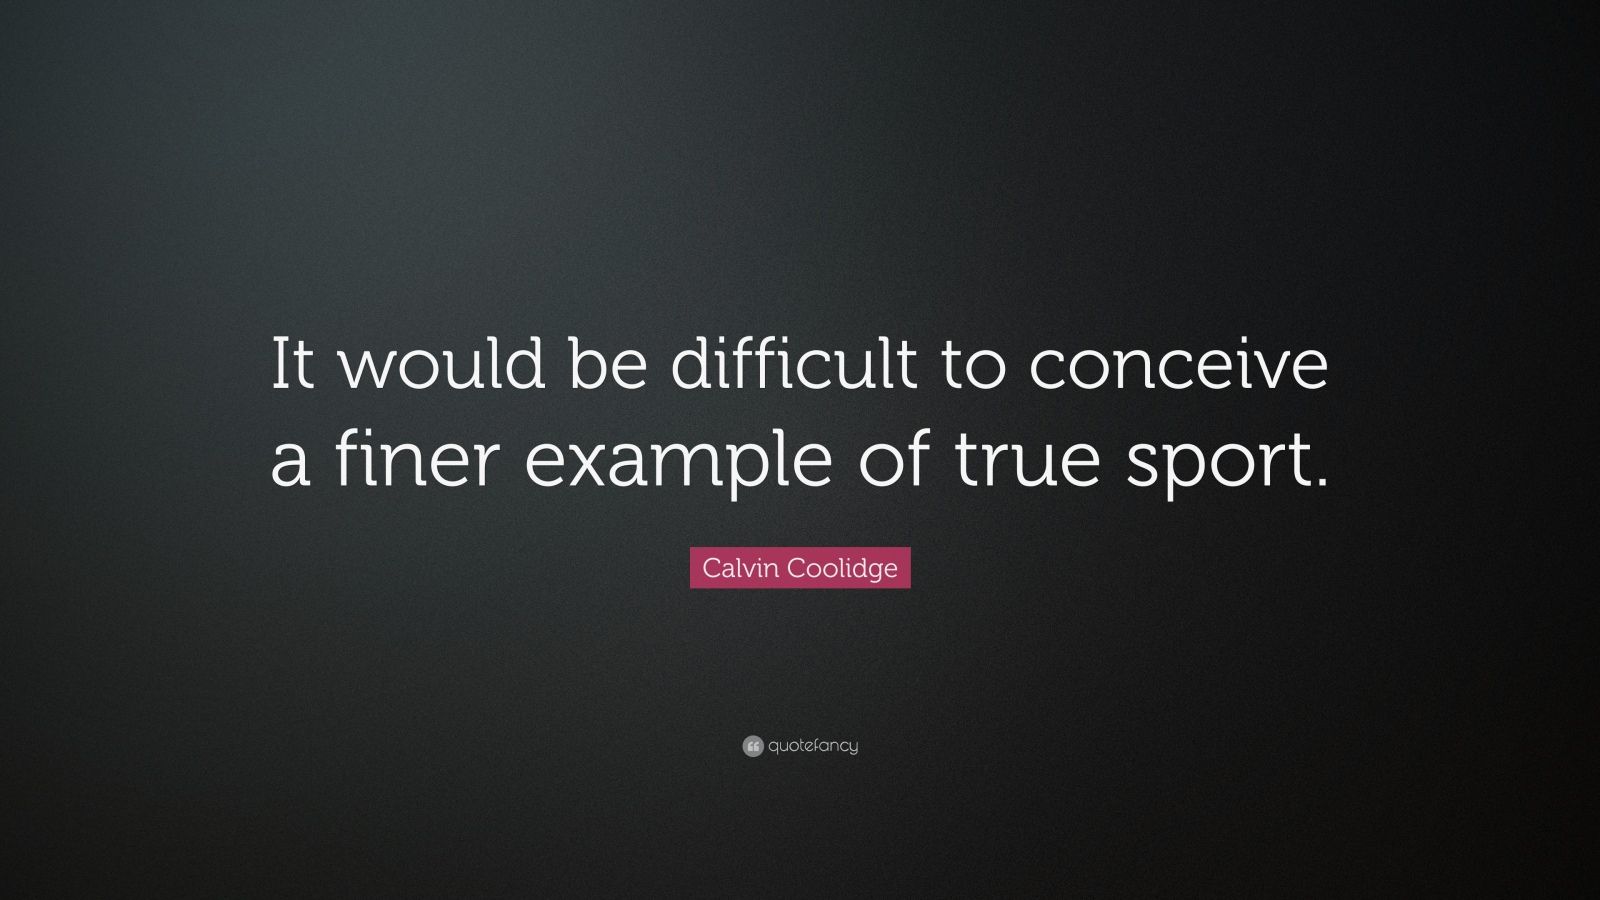 Calvin Coolidge Quote: “It would be difficult to conceive a finer ...